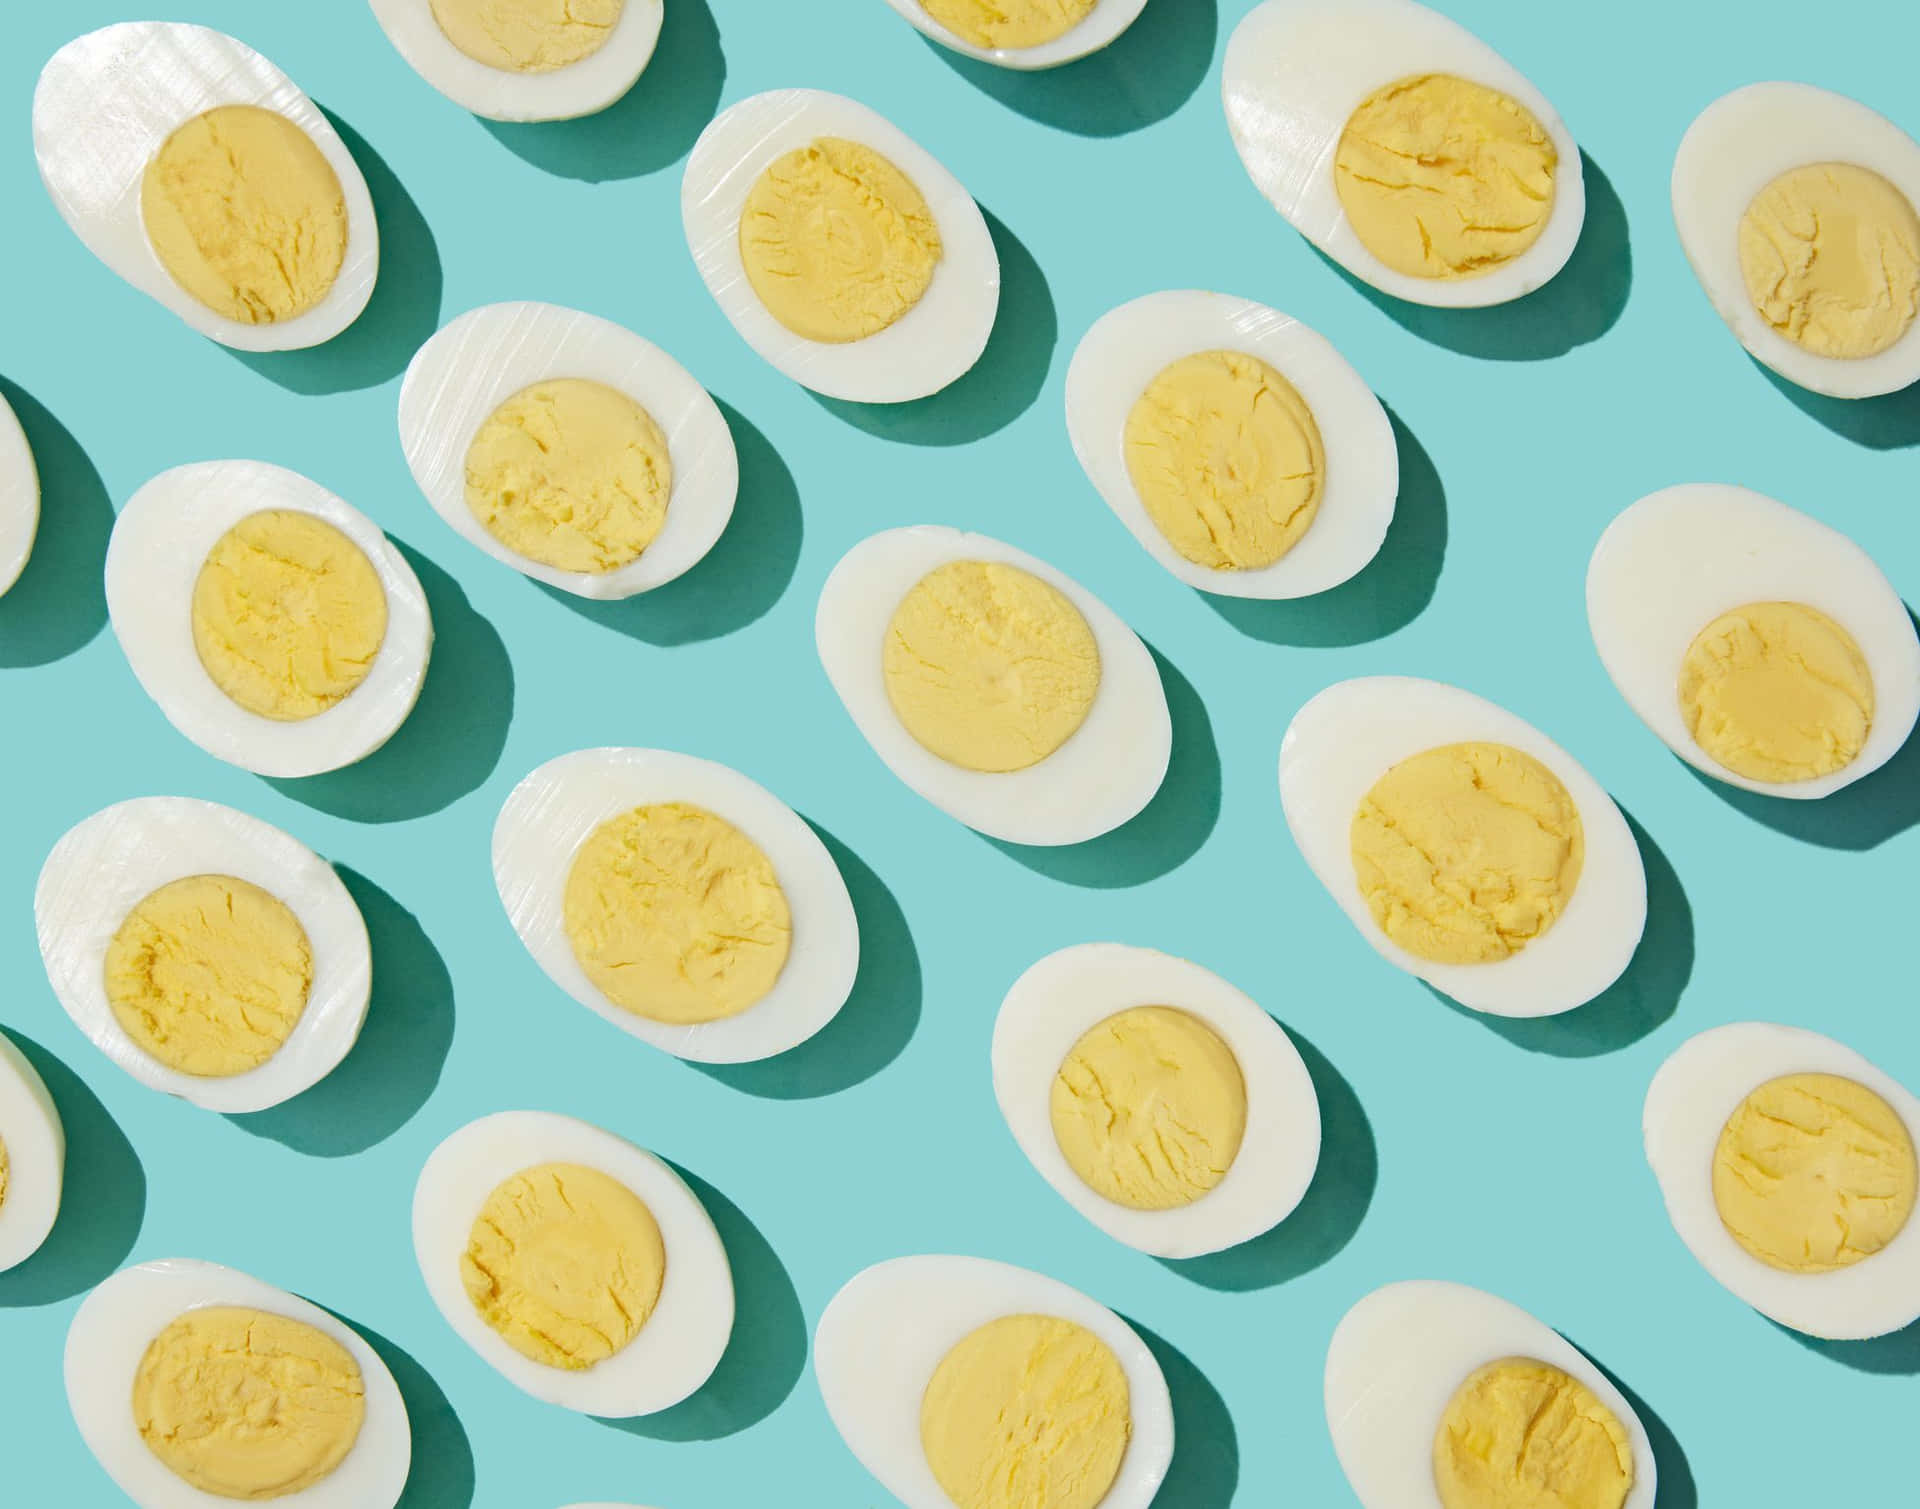 An Egg-cellent Breakfast or Snack